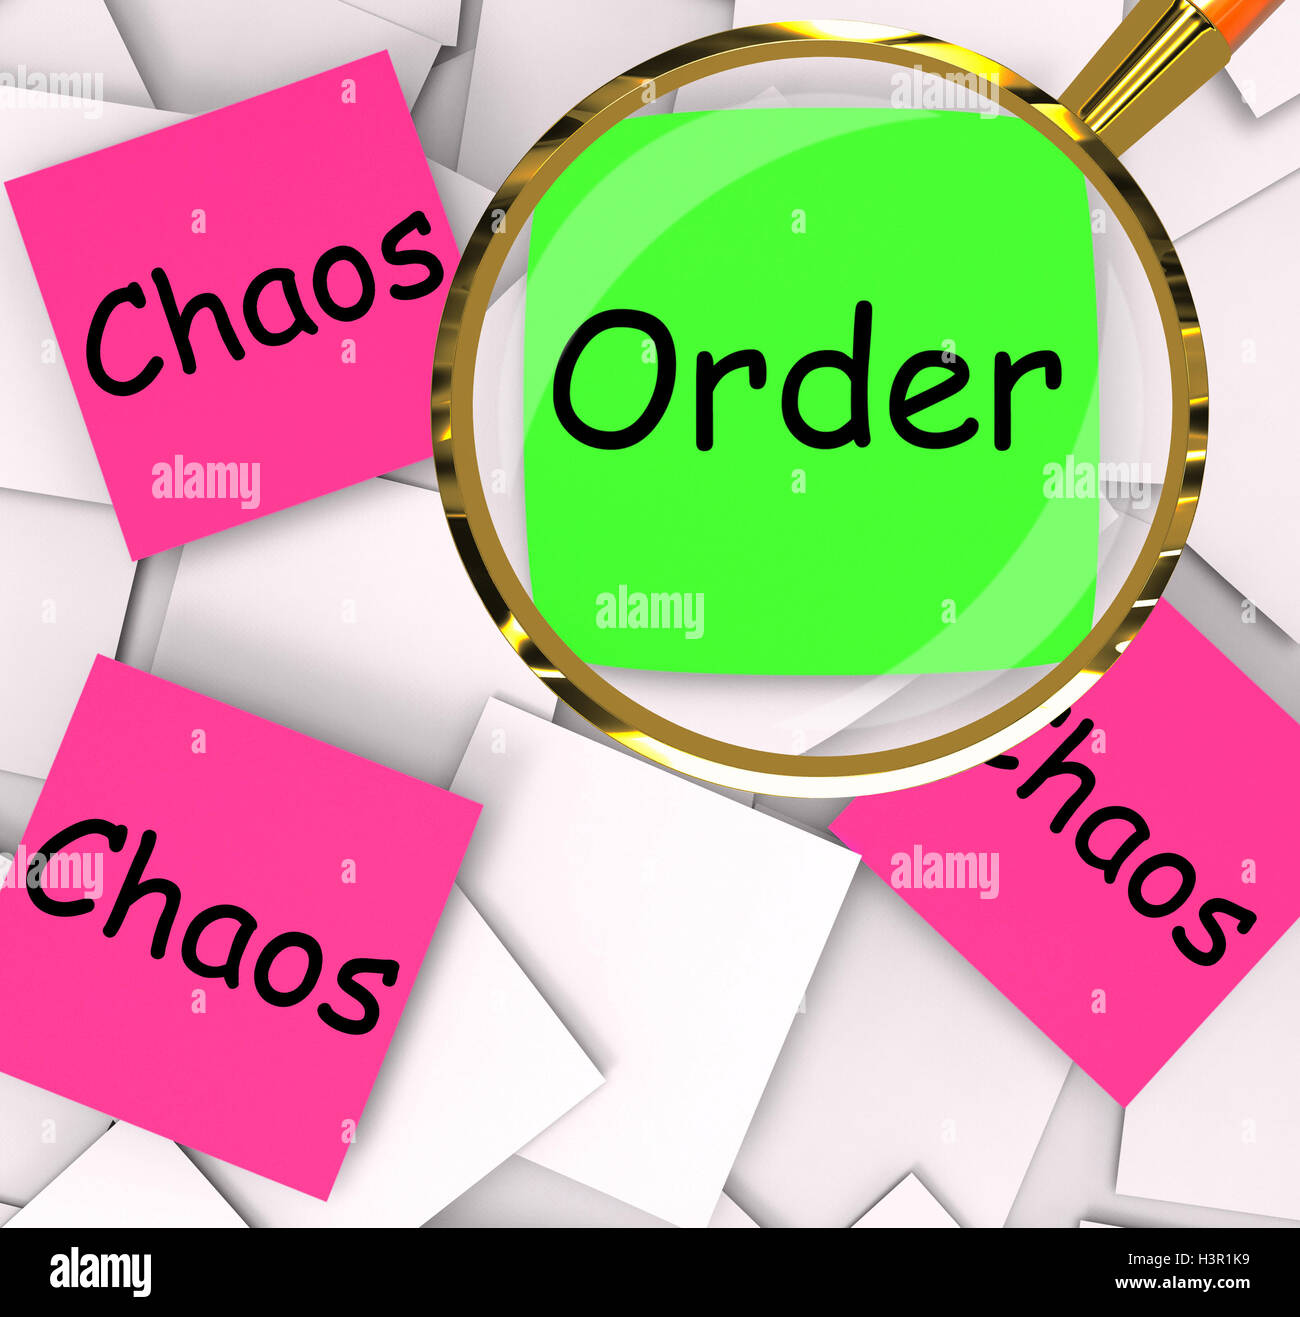 Order Chaos Post-It Papers Mean Orderly Or Chaotic Stock Photo